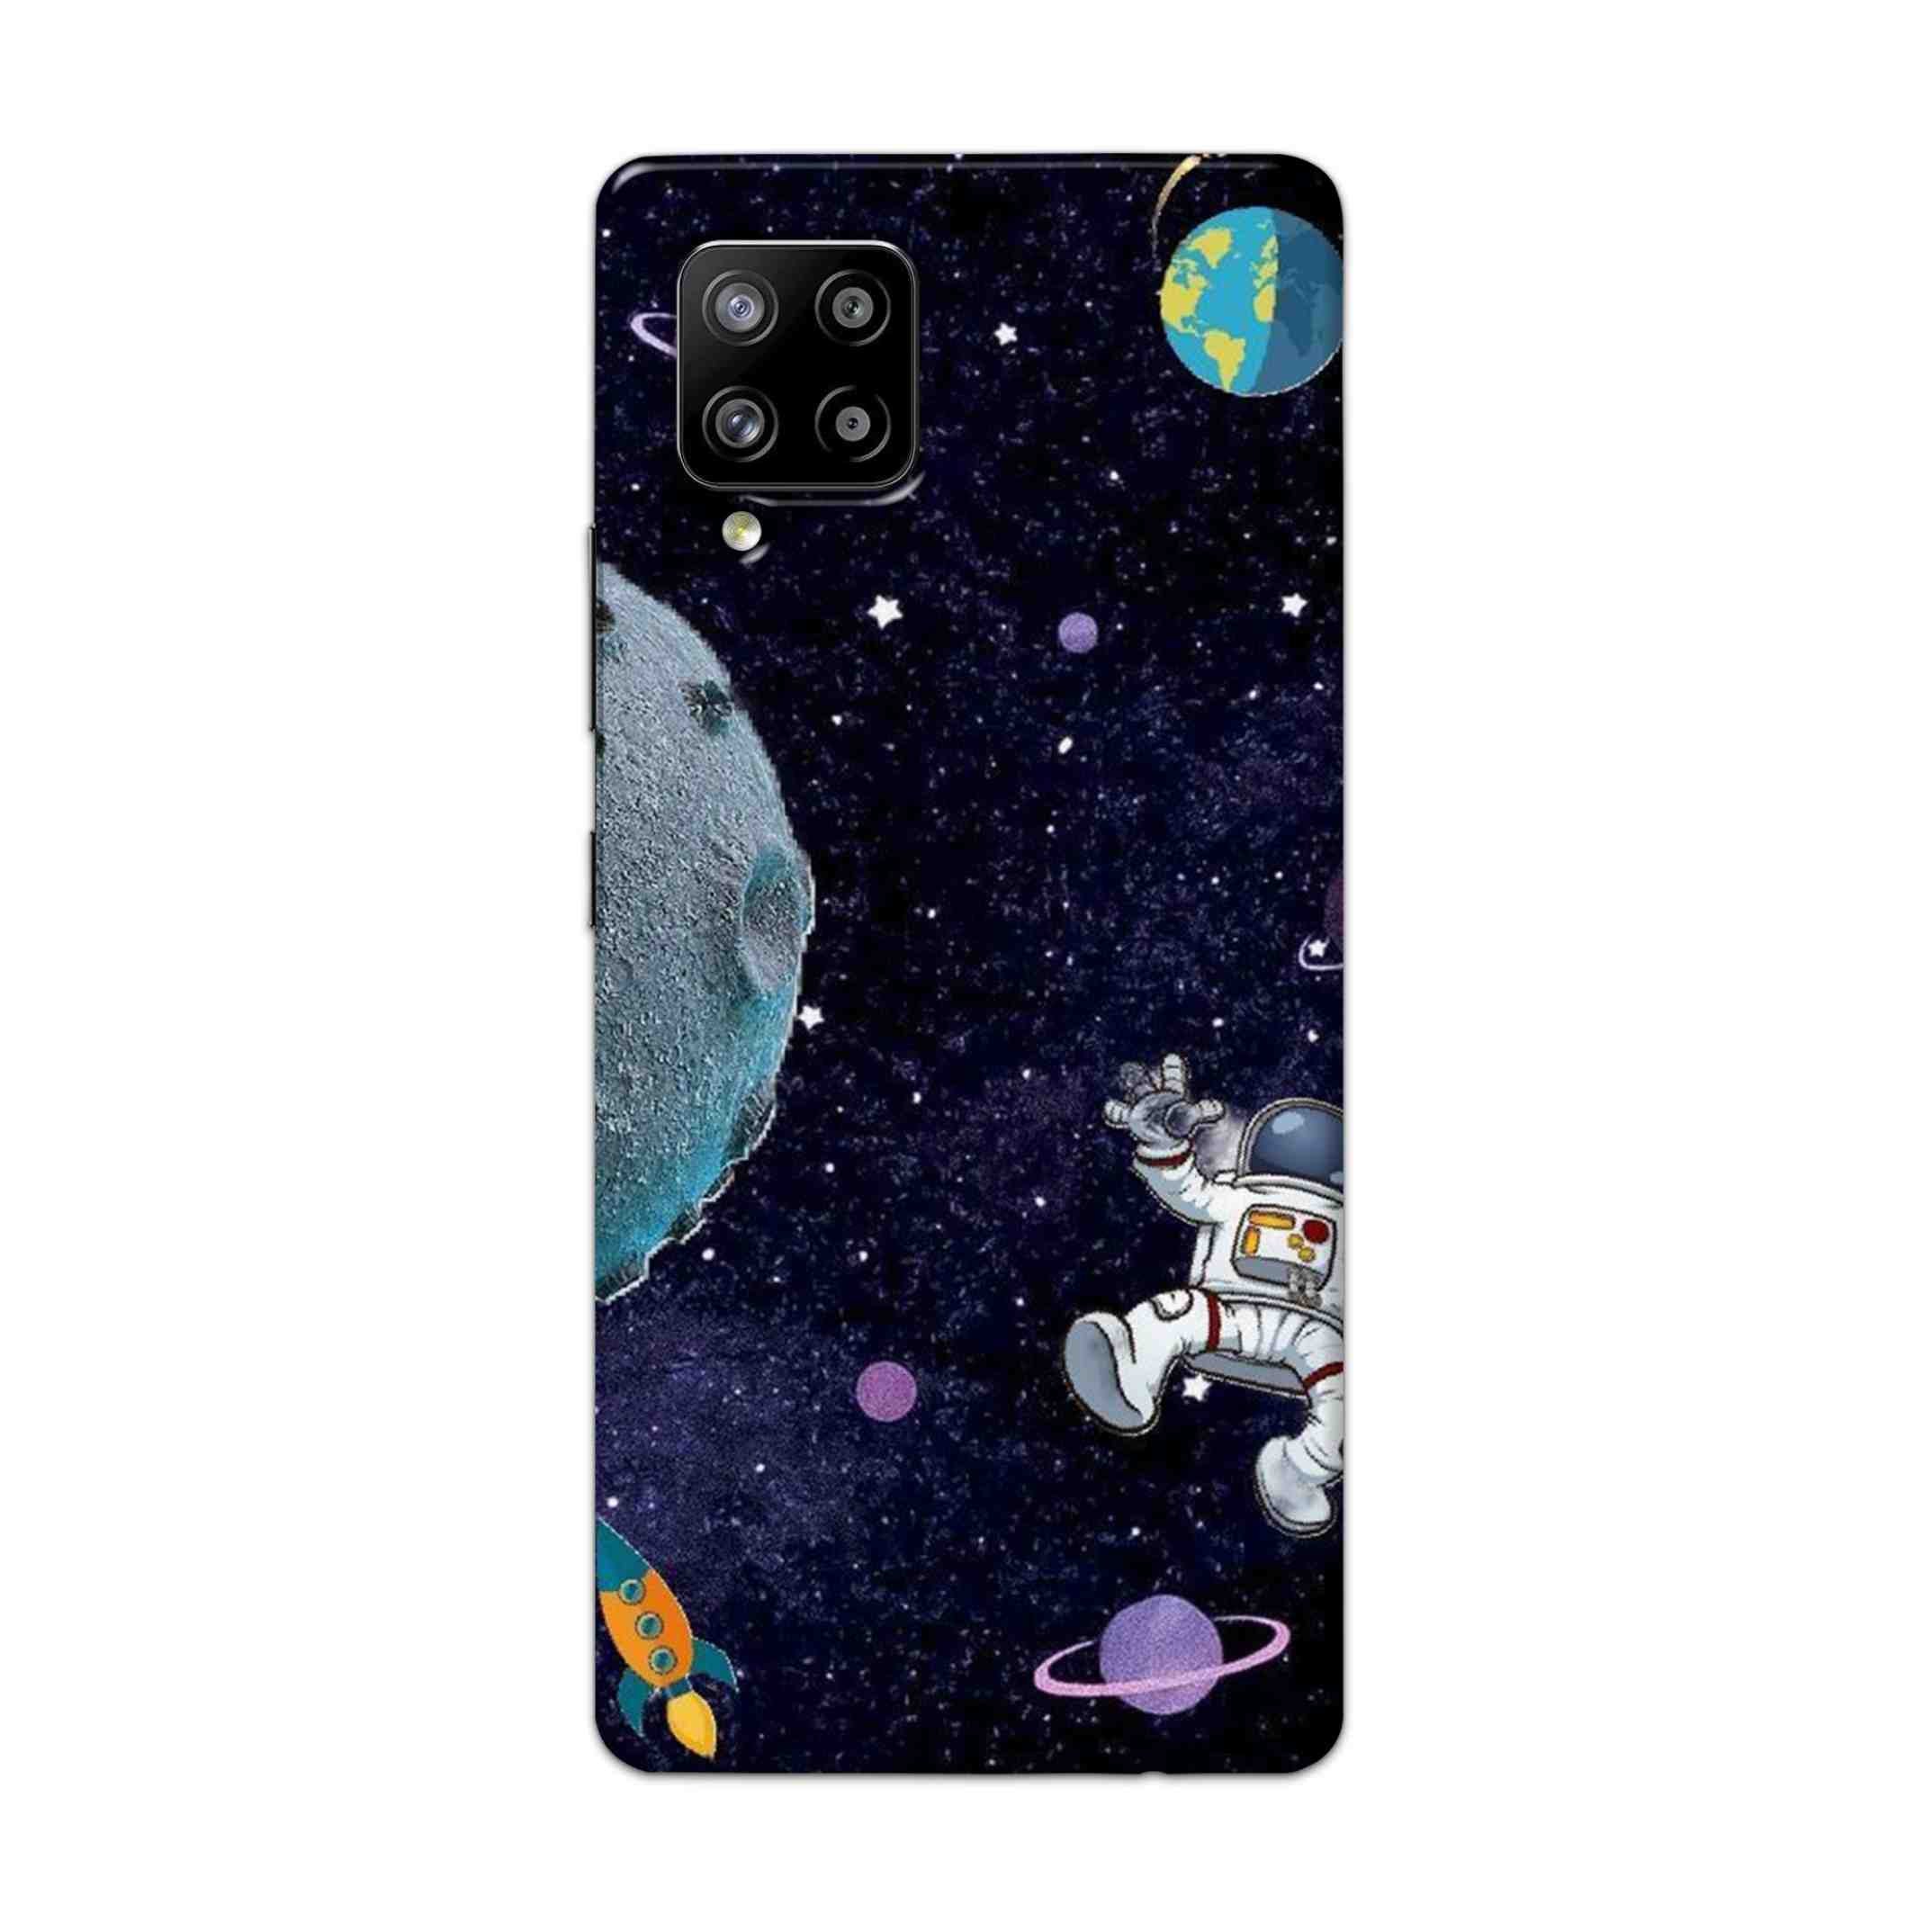 Buy Space Hard Back Mobile Phone Case Cover For Samsung Galaxy M42 Online